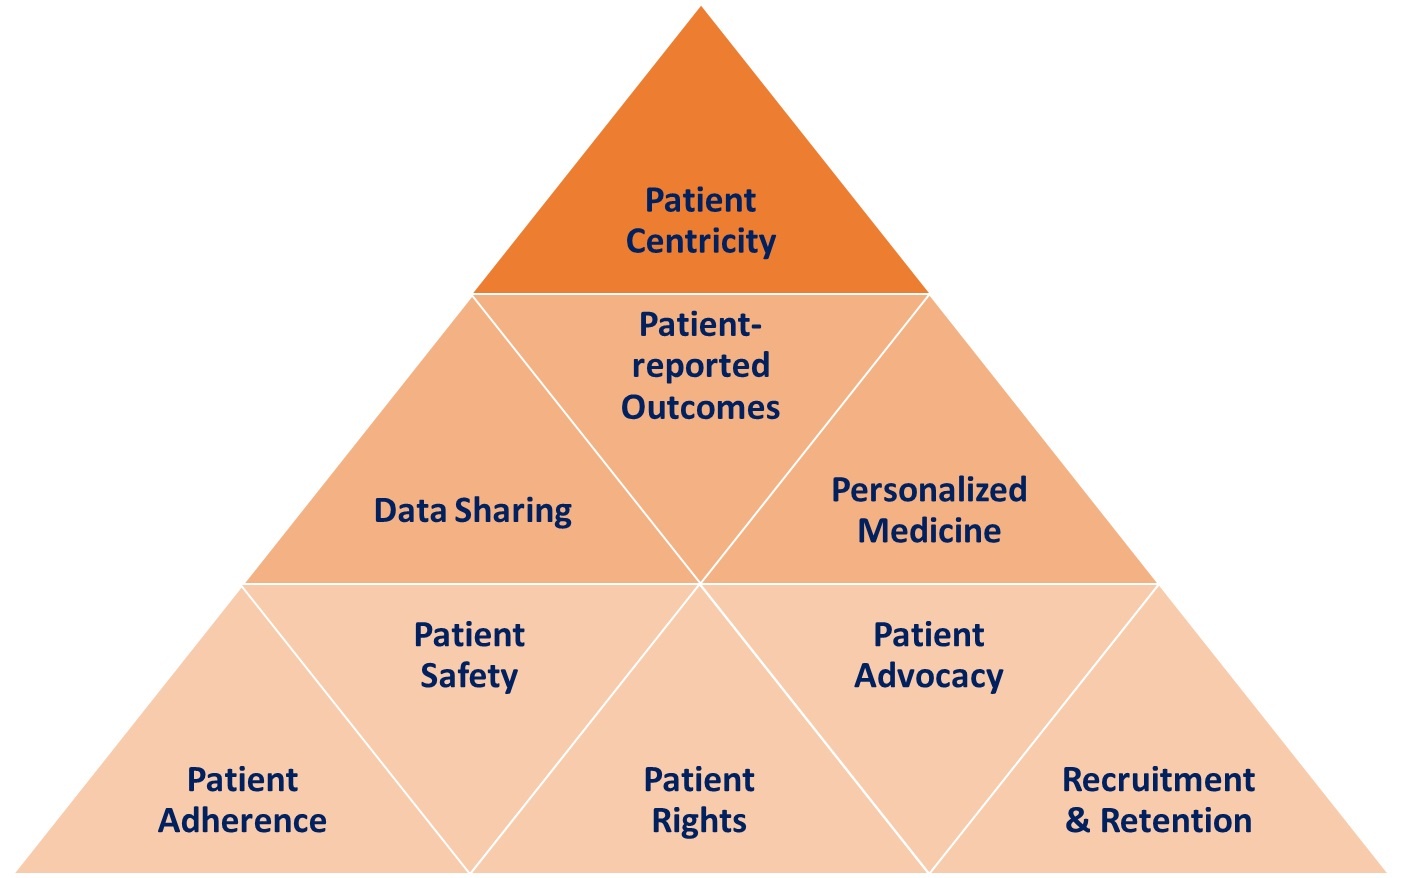 patient-centricity pyramid